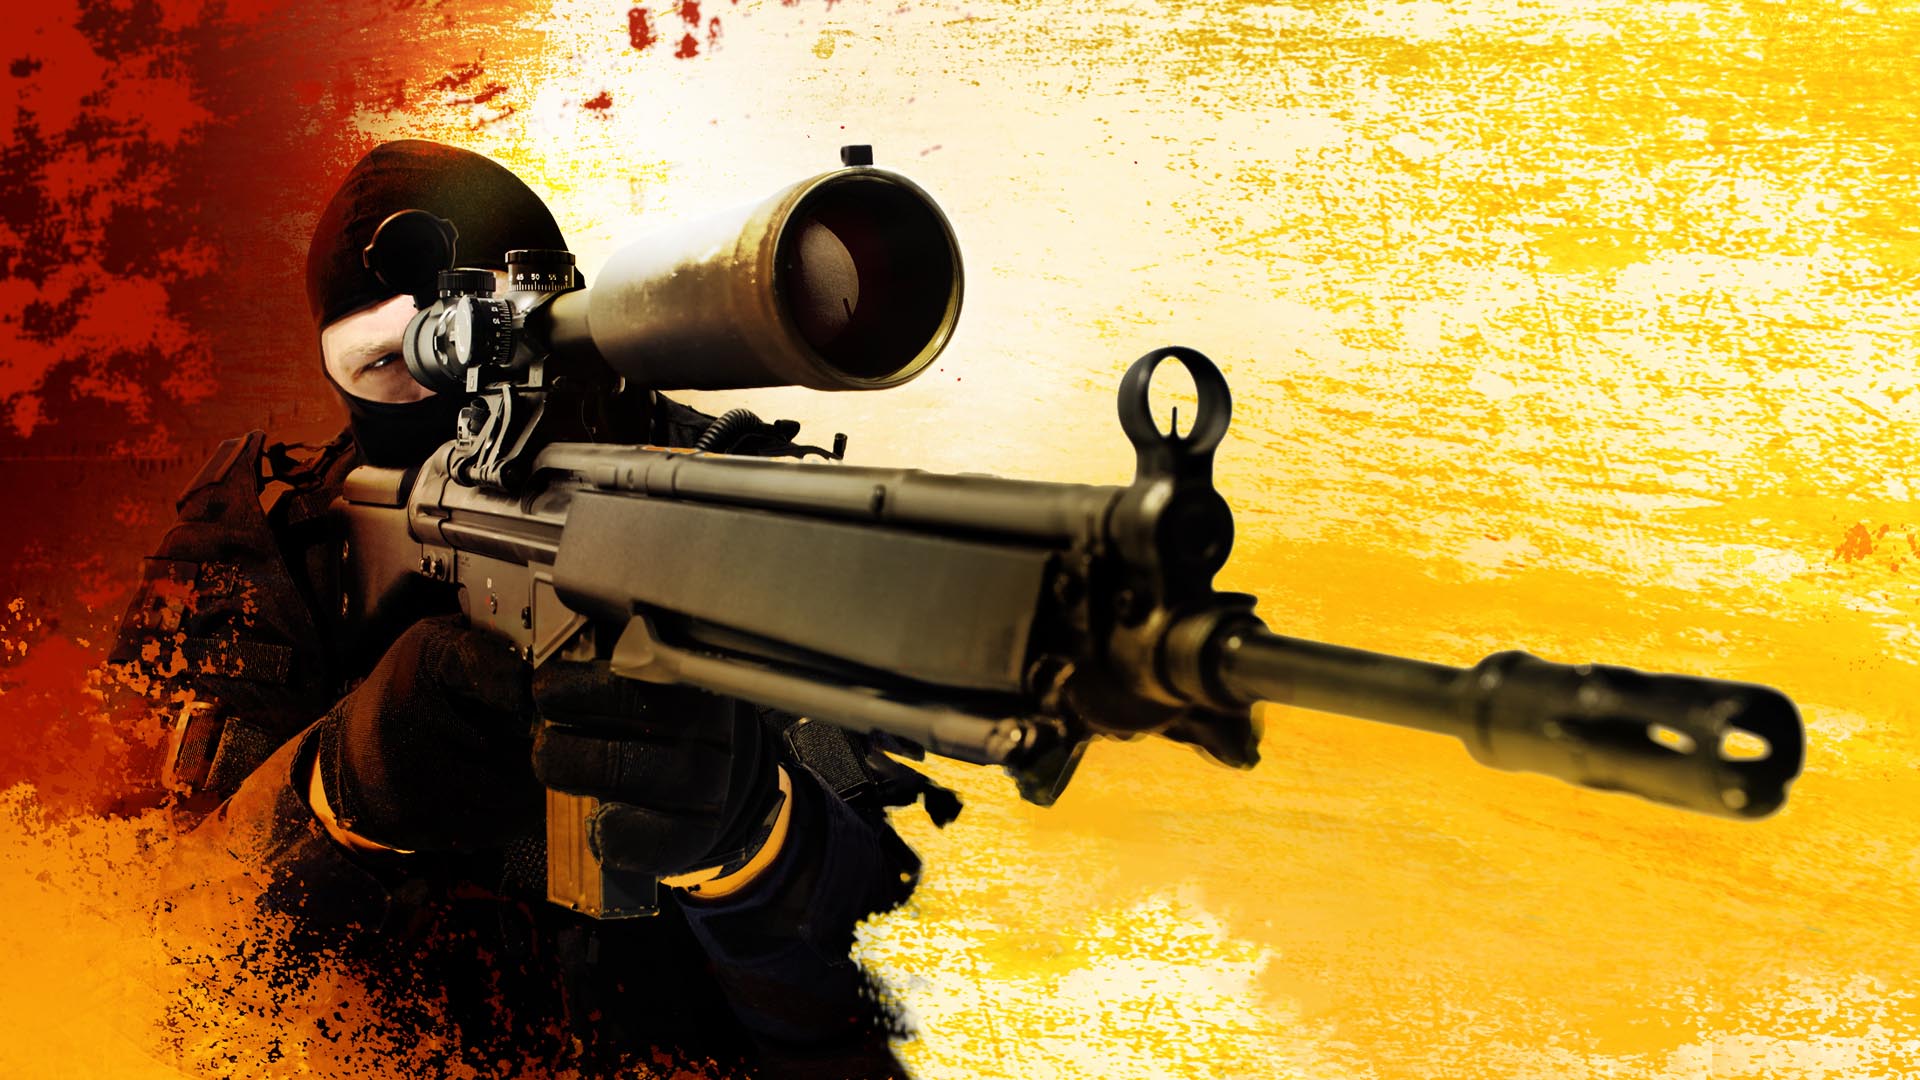 Video Game Counter-Strike: Global Offensive HD Wallpaper